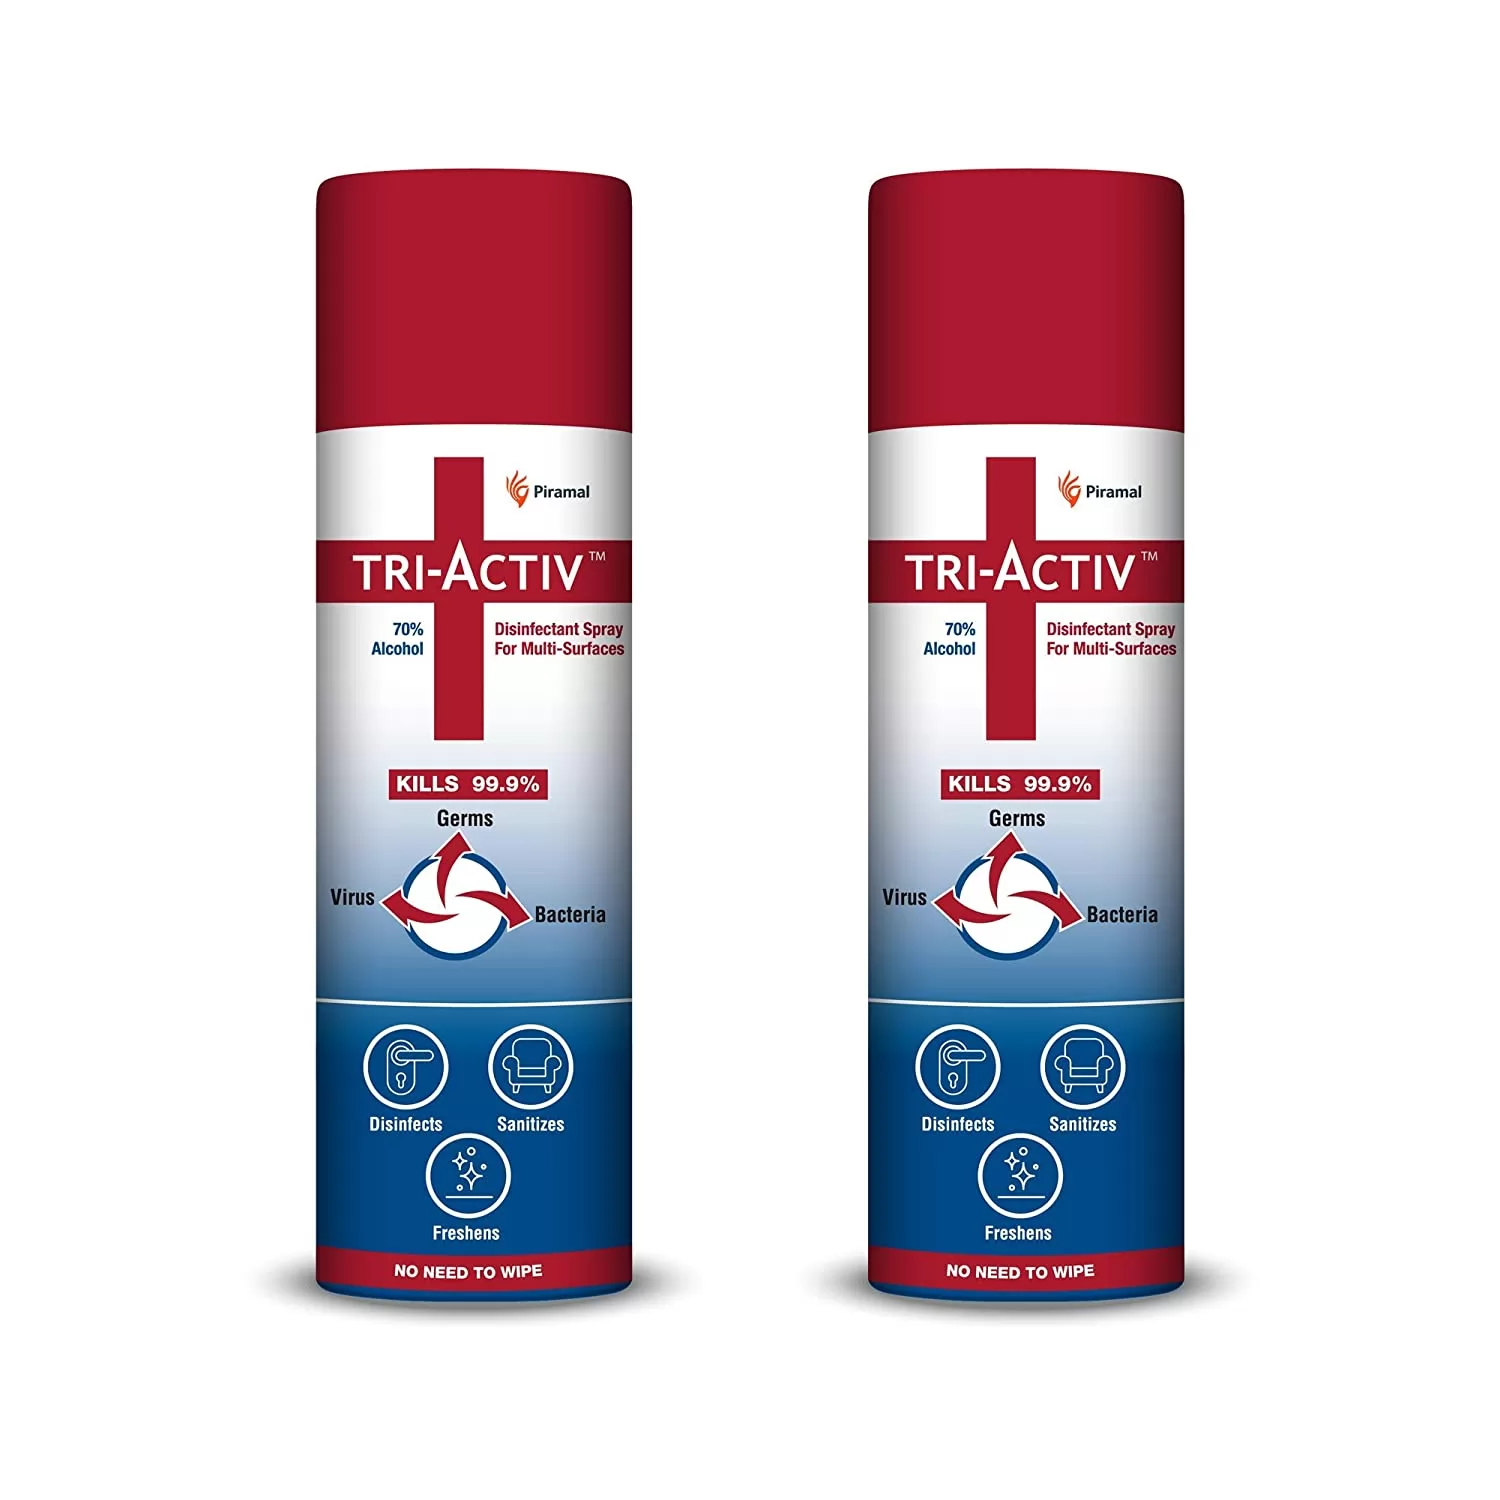  Tri-Activ Disinfectant Spray for Multi-Surfaces